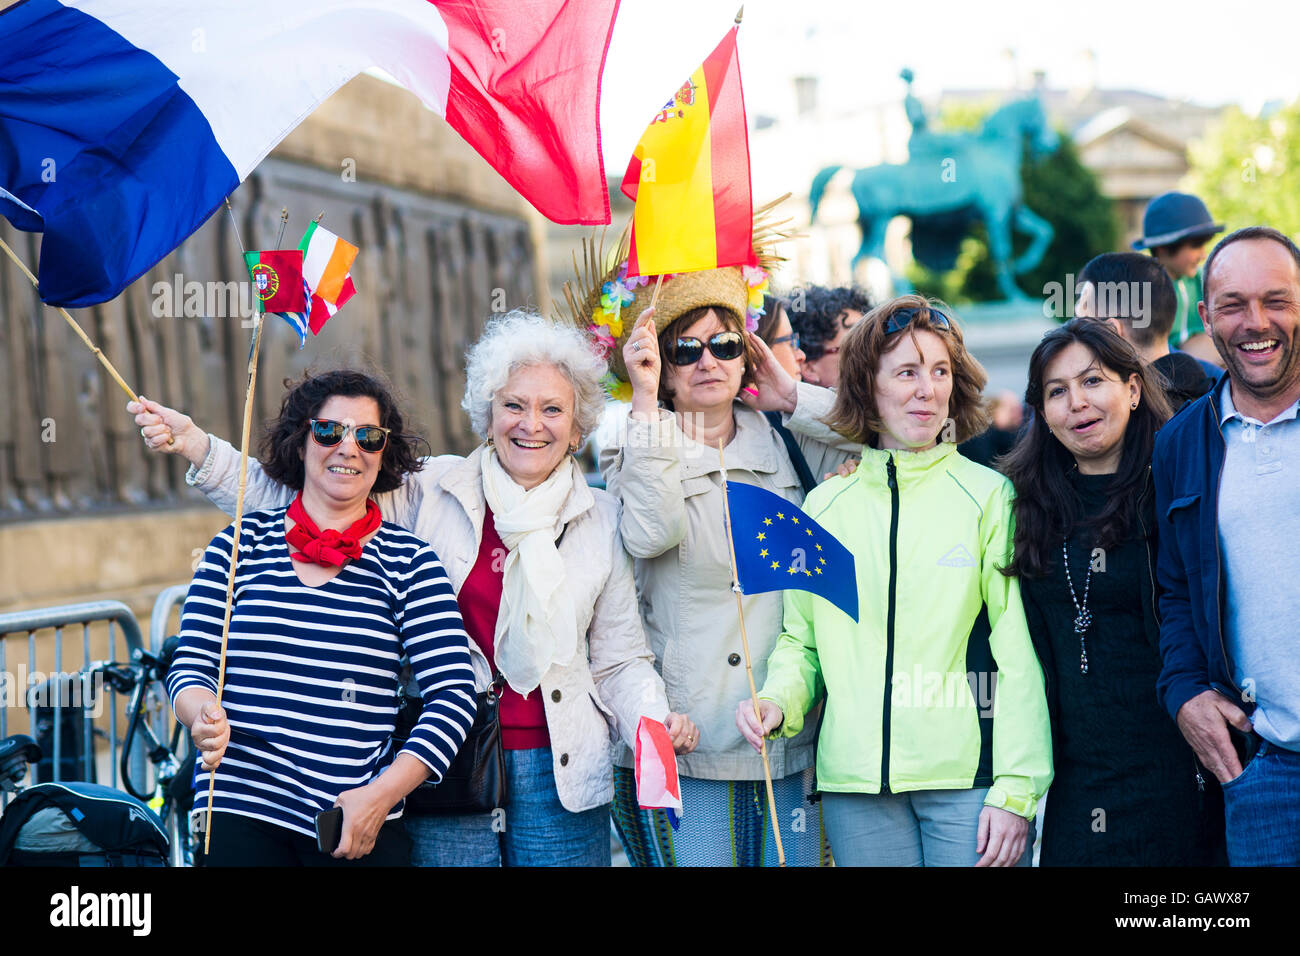 Brexit protest. A group of european people holding different EU flags protesting brexit in UK. Credit:  Hayley Blackledge/Alamy Live News Stock Photo